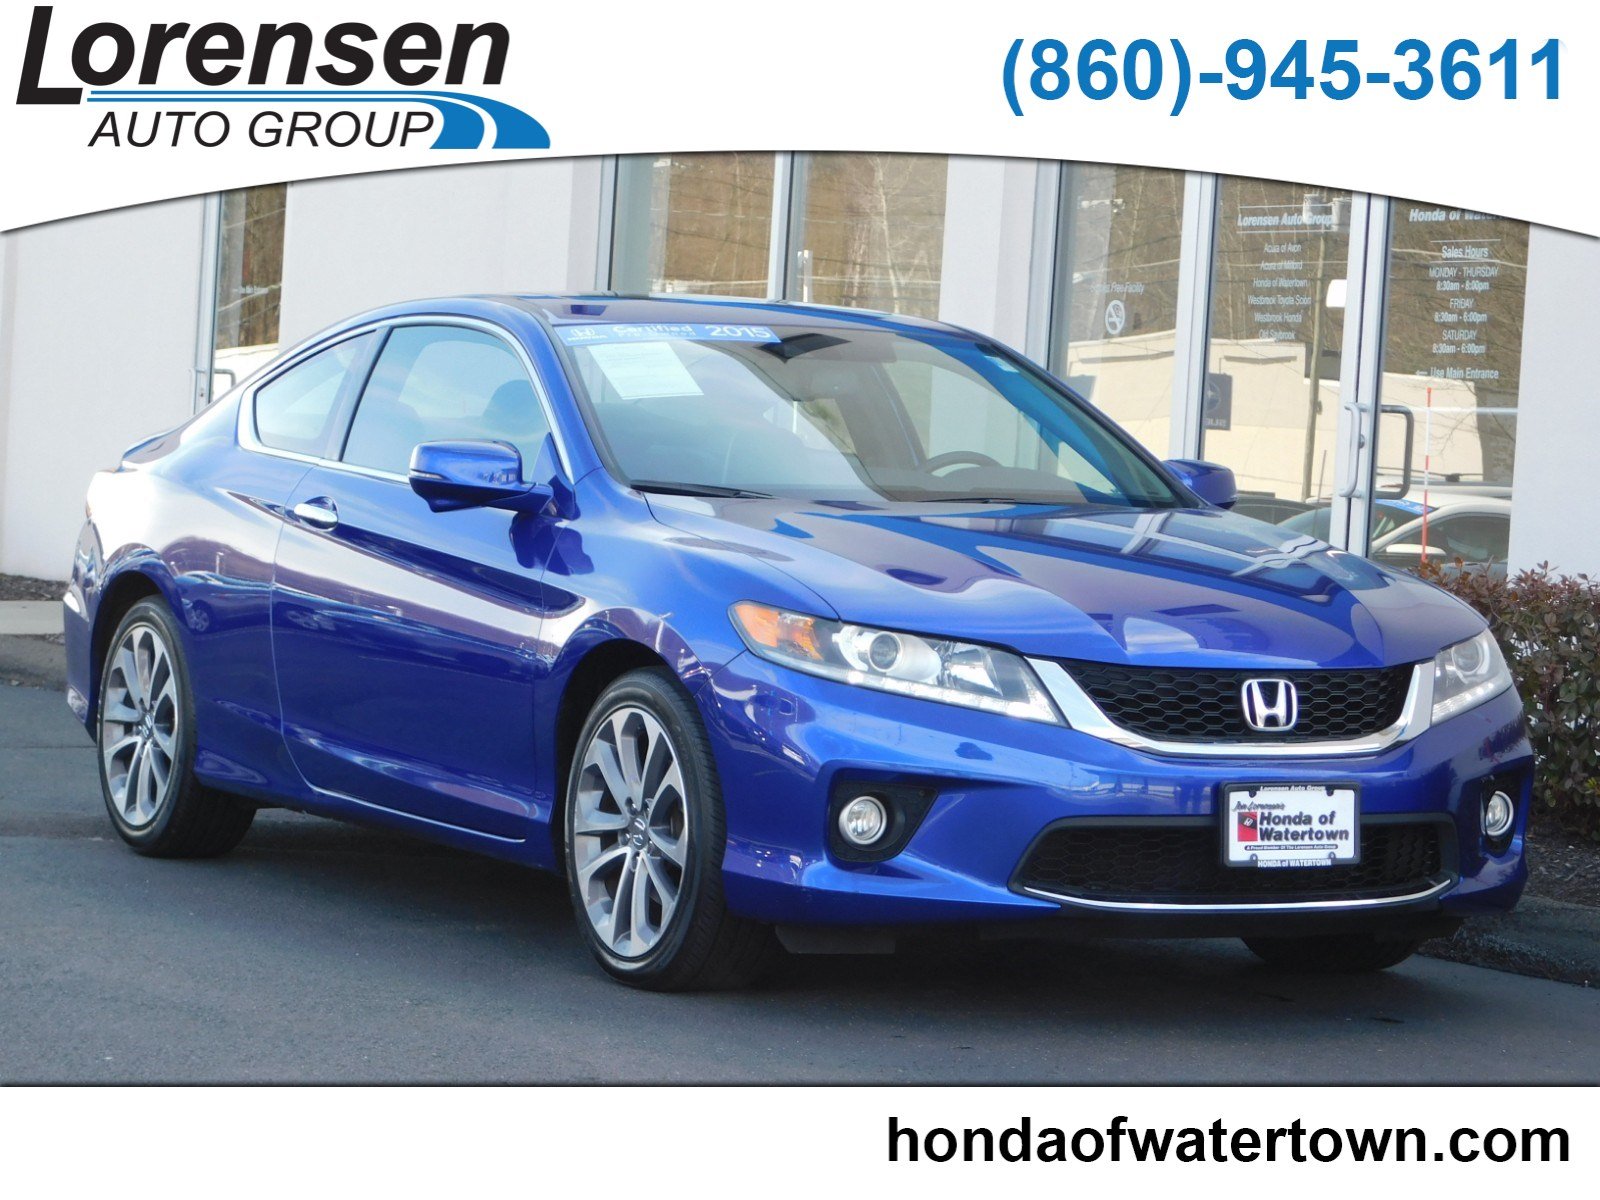 Certified Pre Owned 2015 Honda Accord Coupe Ex L 2dr Car In